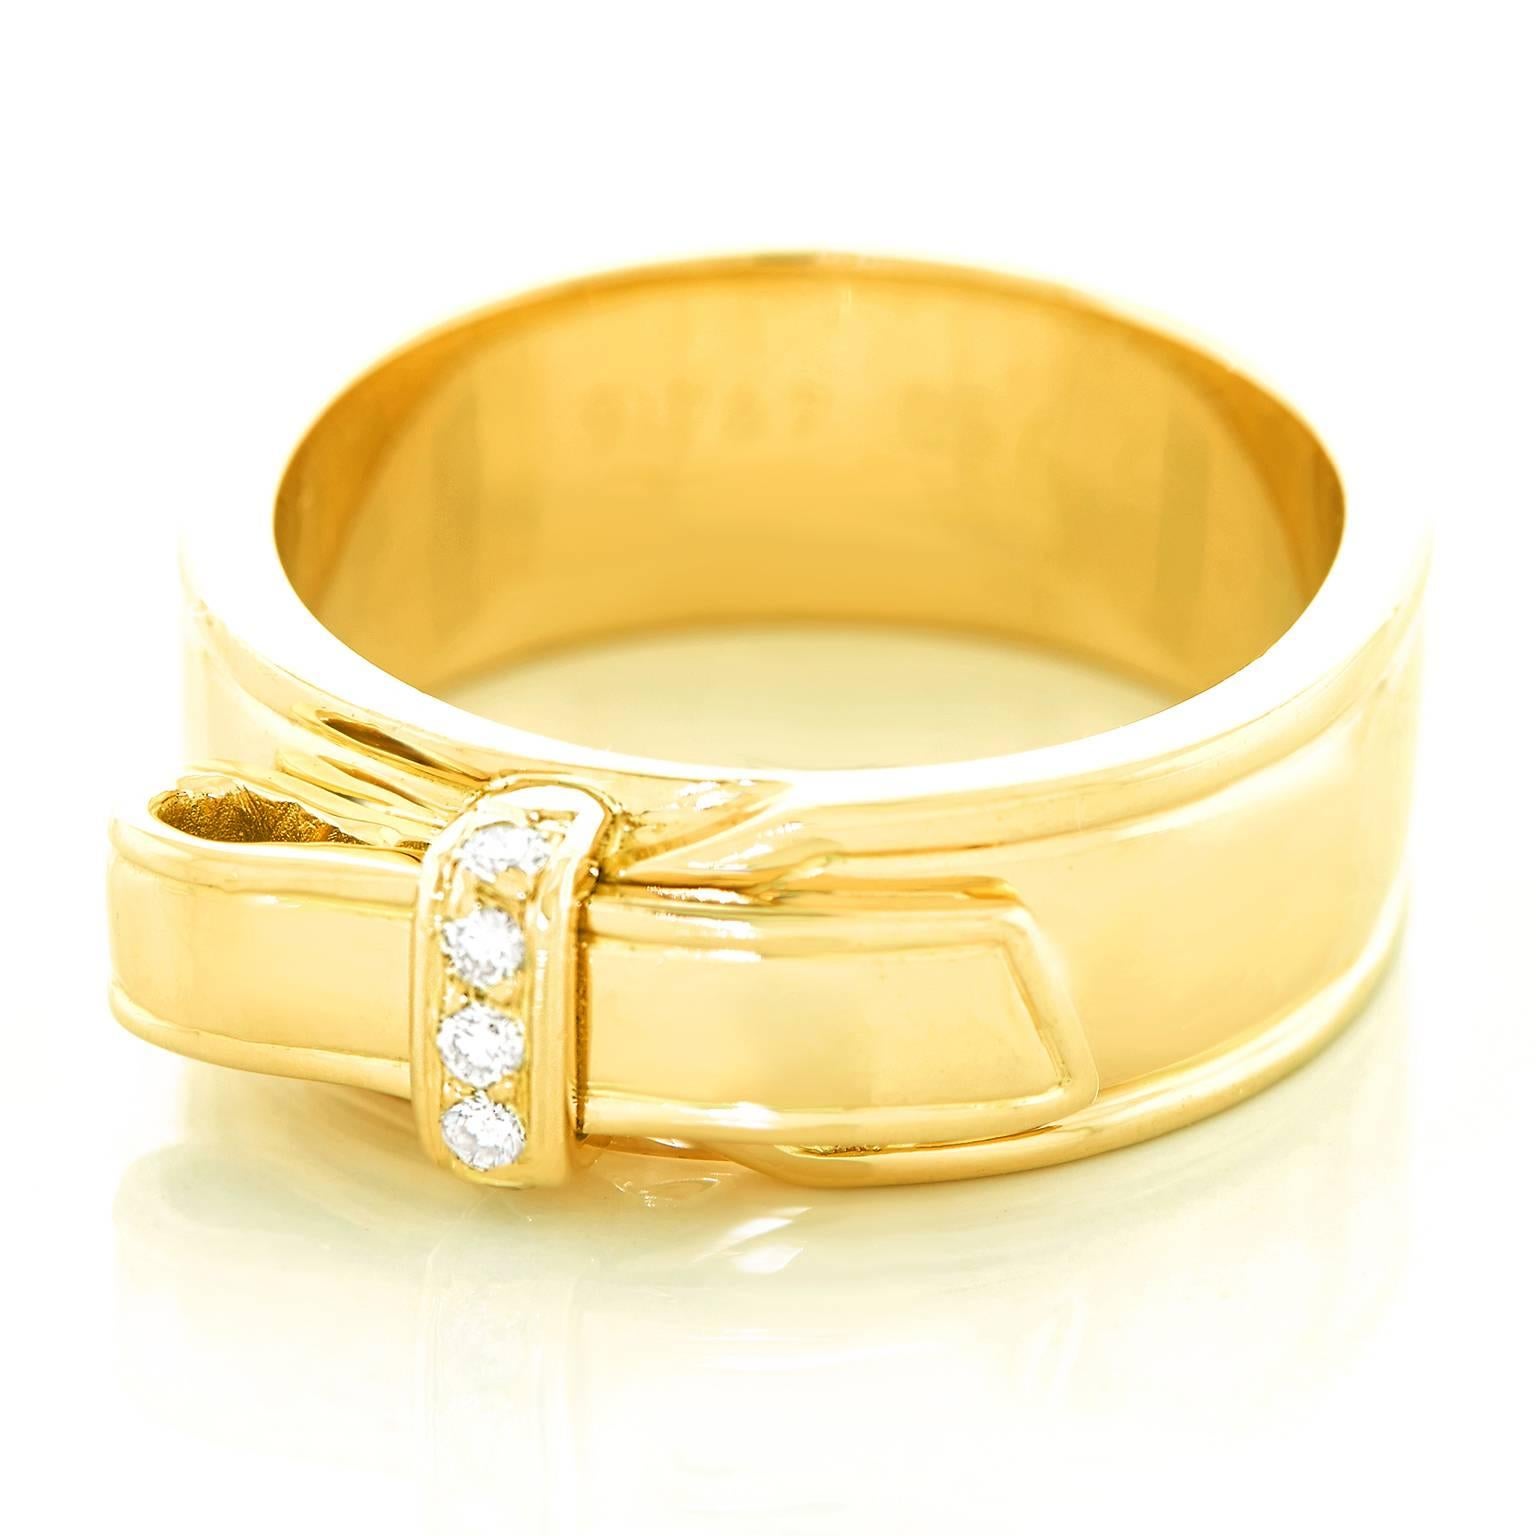 Hermes Gold Buckle Ring 1